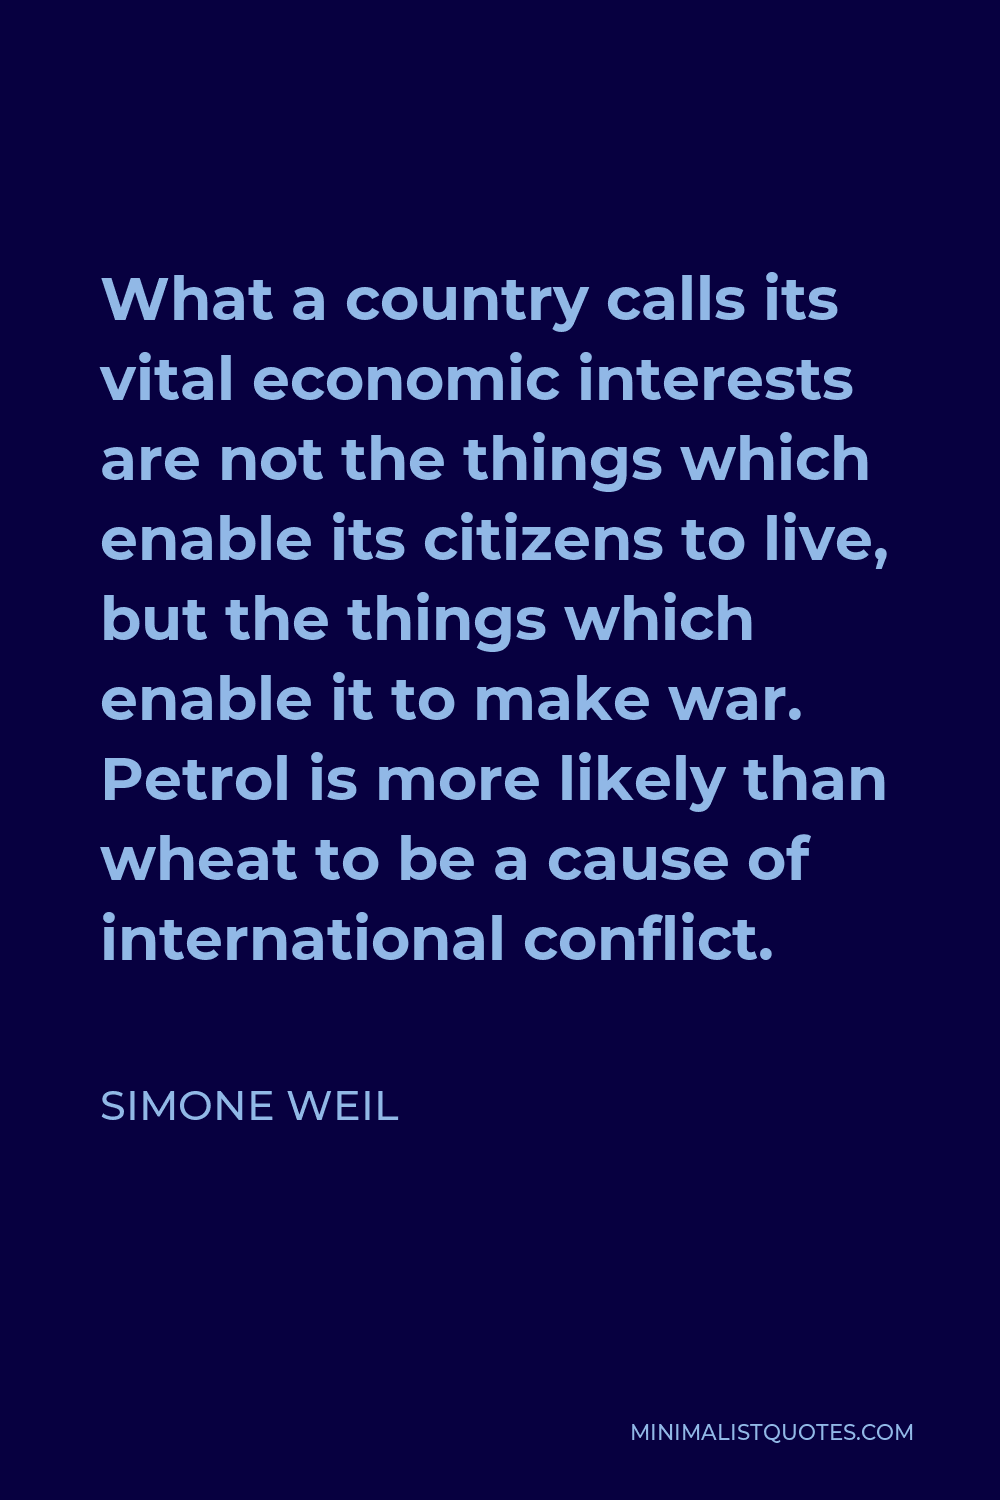 Simone Weil Quote - What a country calls its vital economic interests are not the things which enable its citizens to live, but the things which enable it to make war. Petrol is more likely than wheat to be a cause of international conflict.